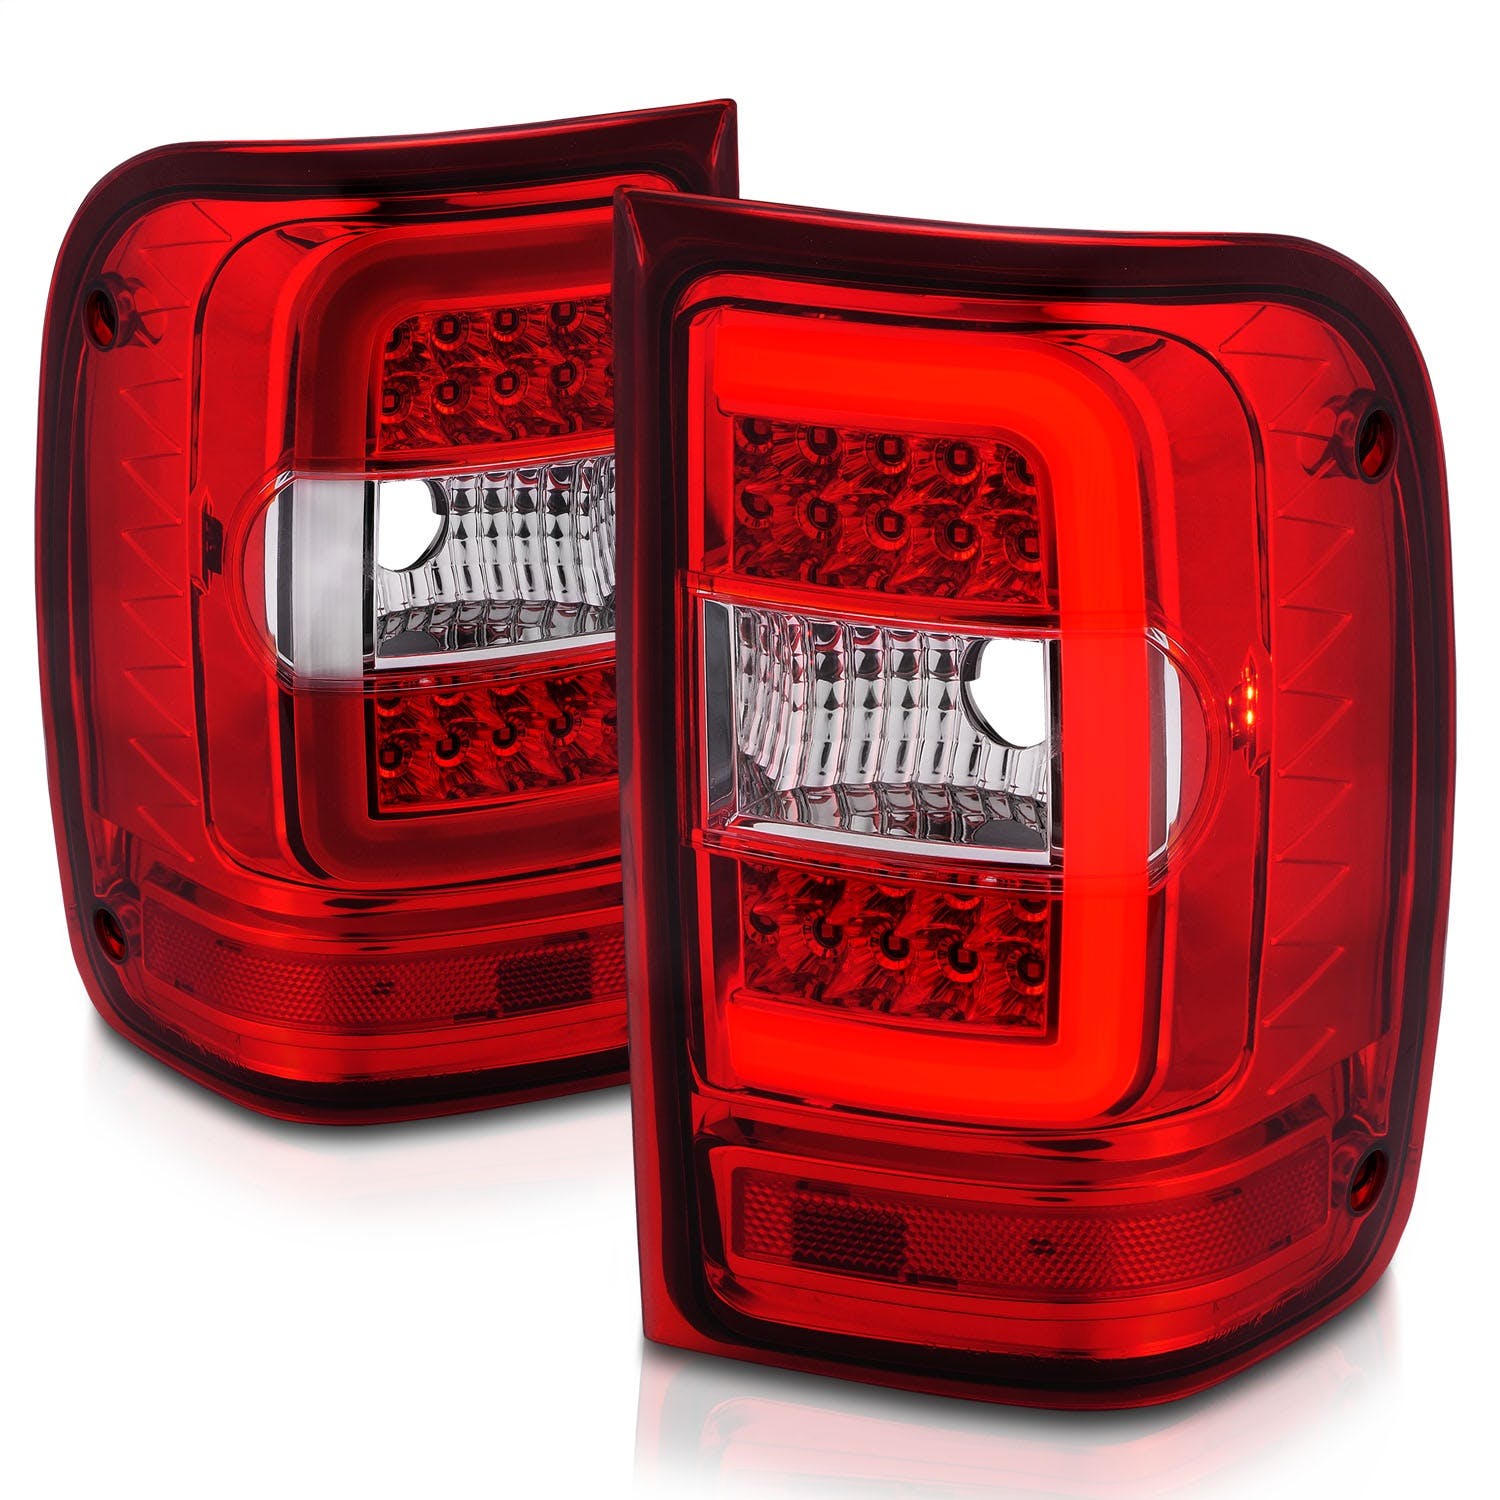 AnzoUSA 311393 LED Tail Lights with Light Bar Chrome Housing Red/Clear Lens